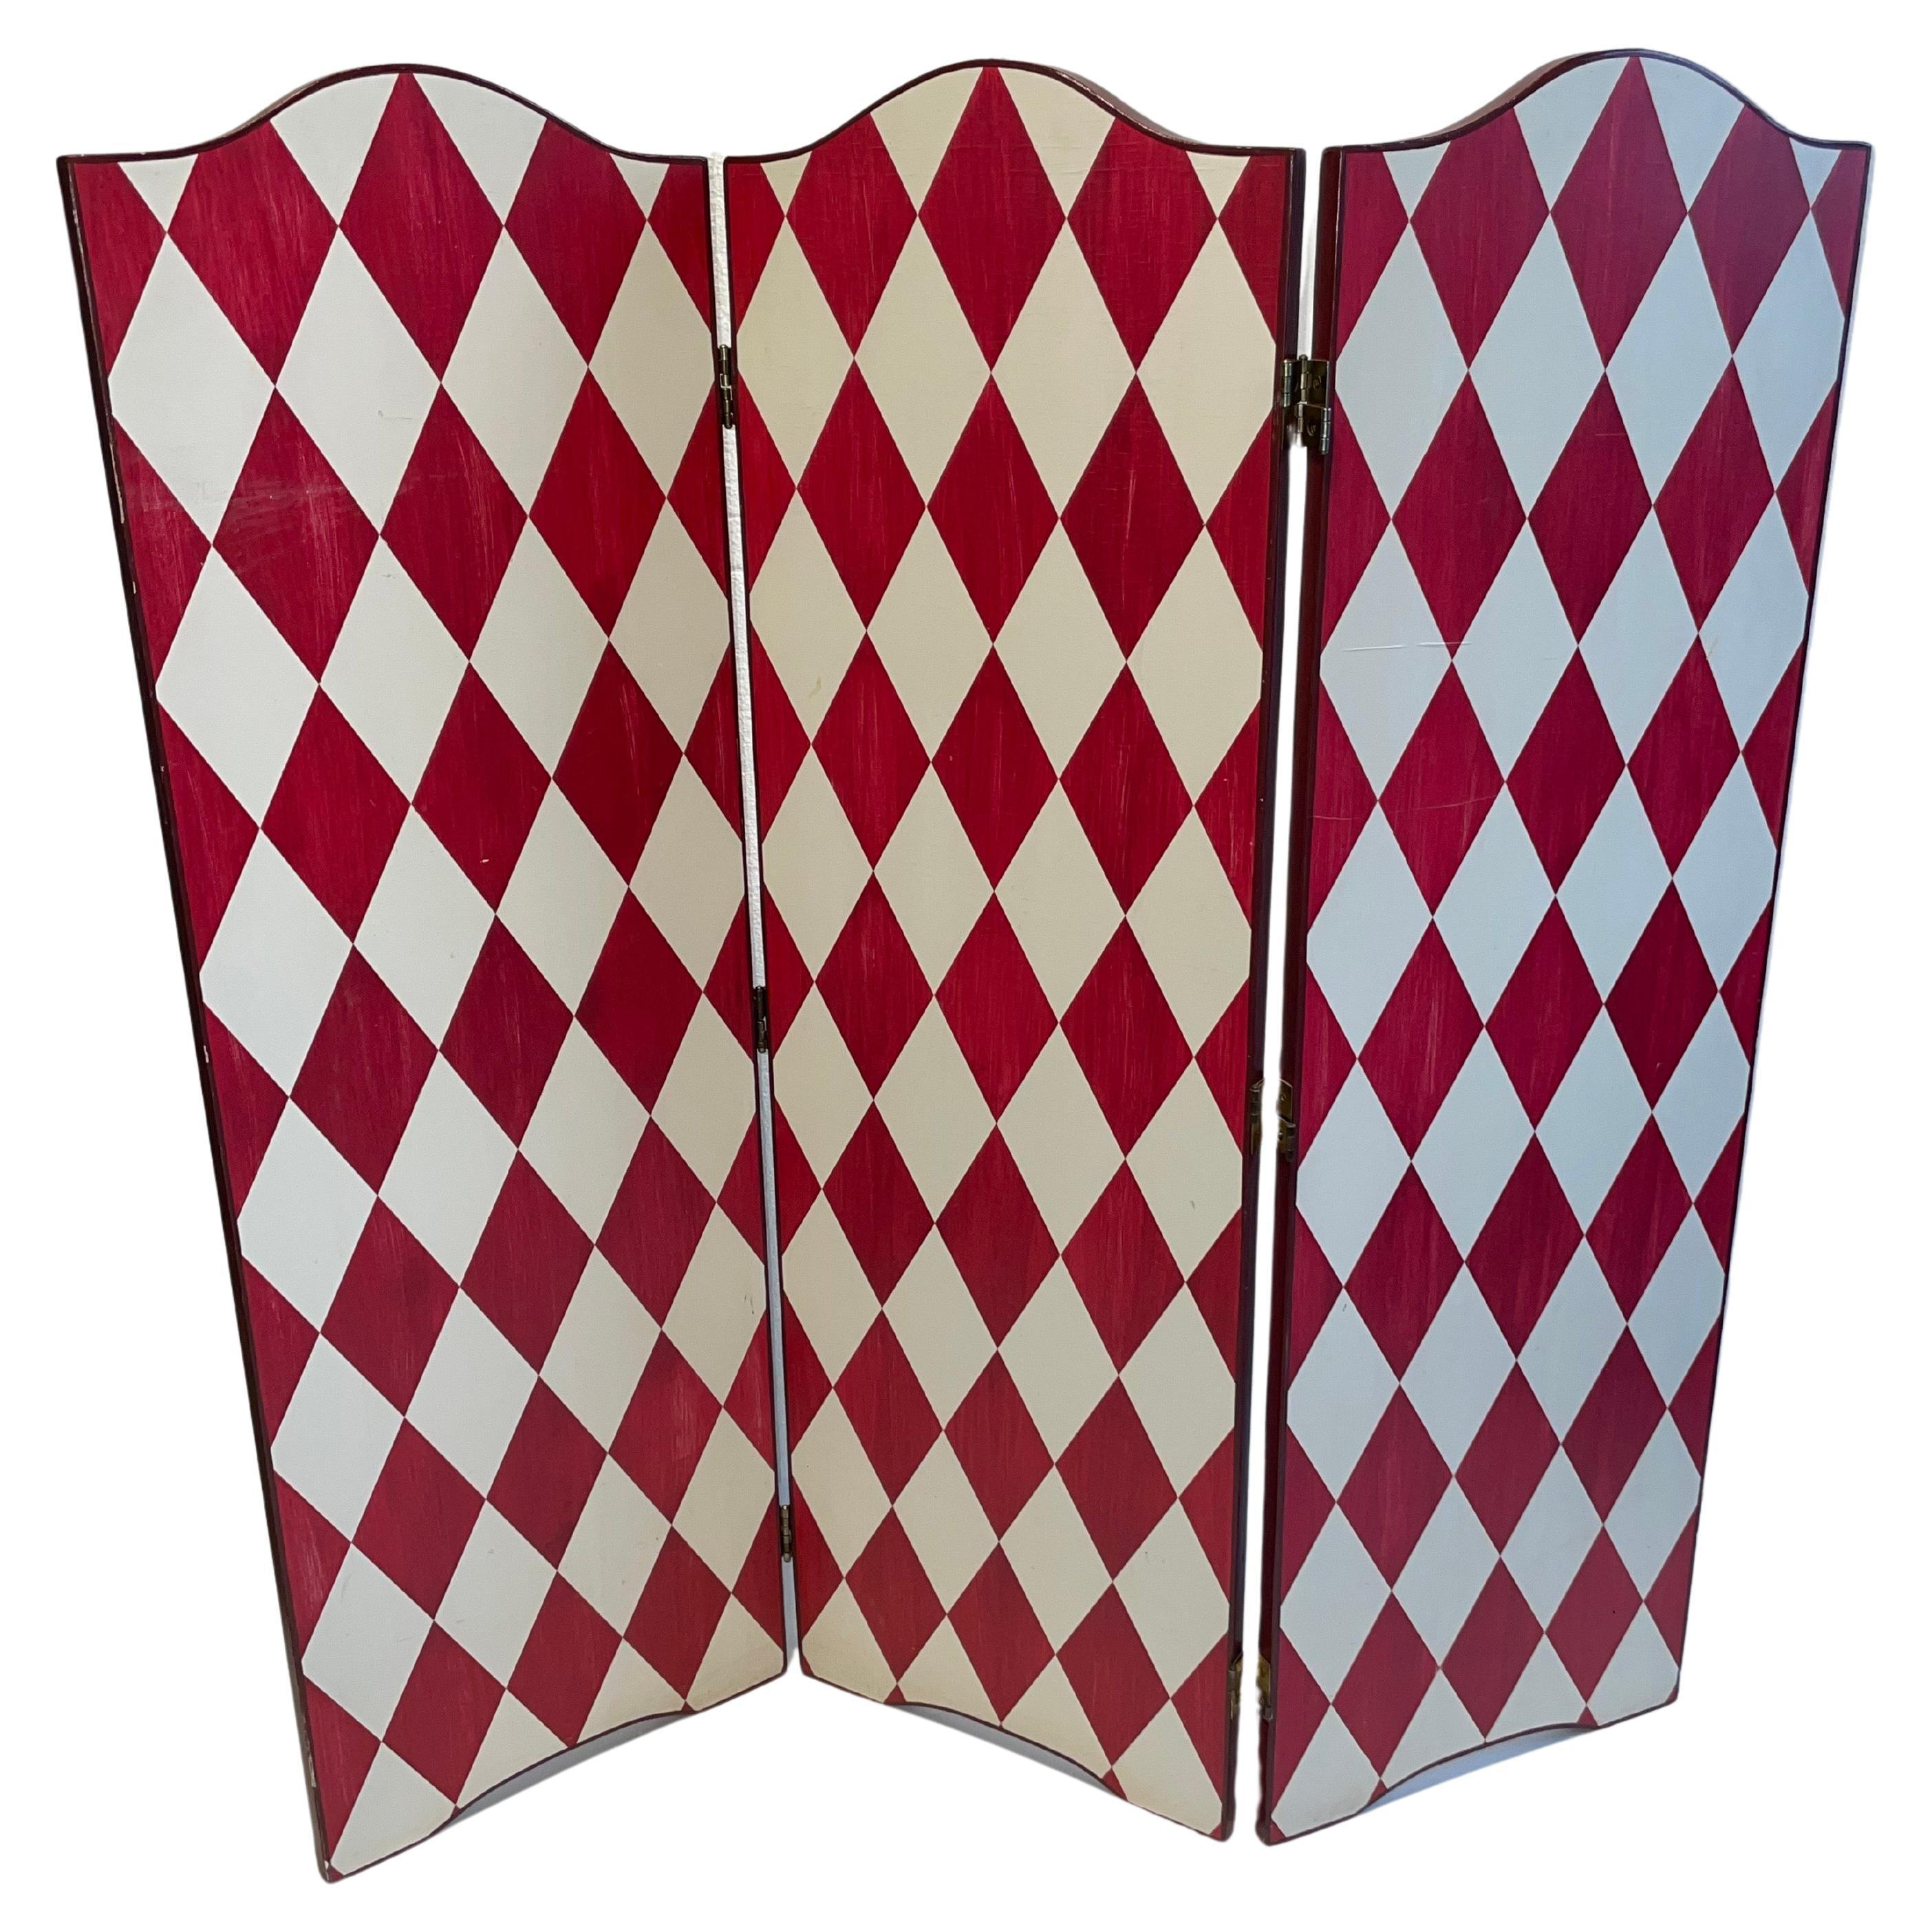 Artistic Hand Painted French Screen Divider in a Festive White and Deep Red For Sale